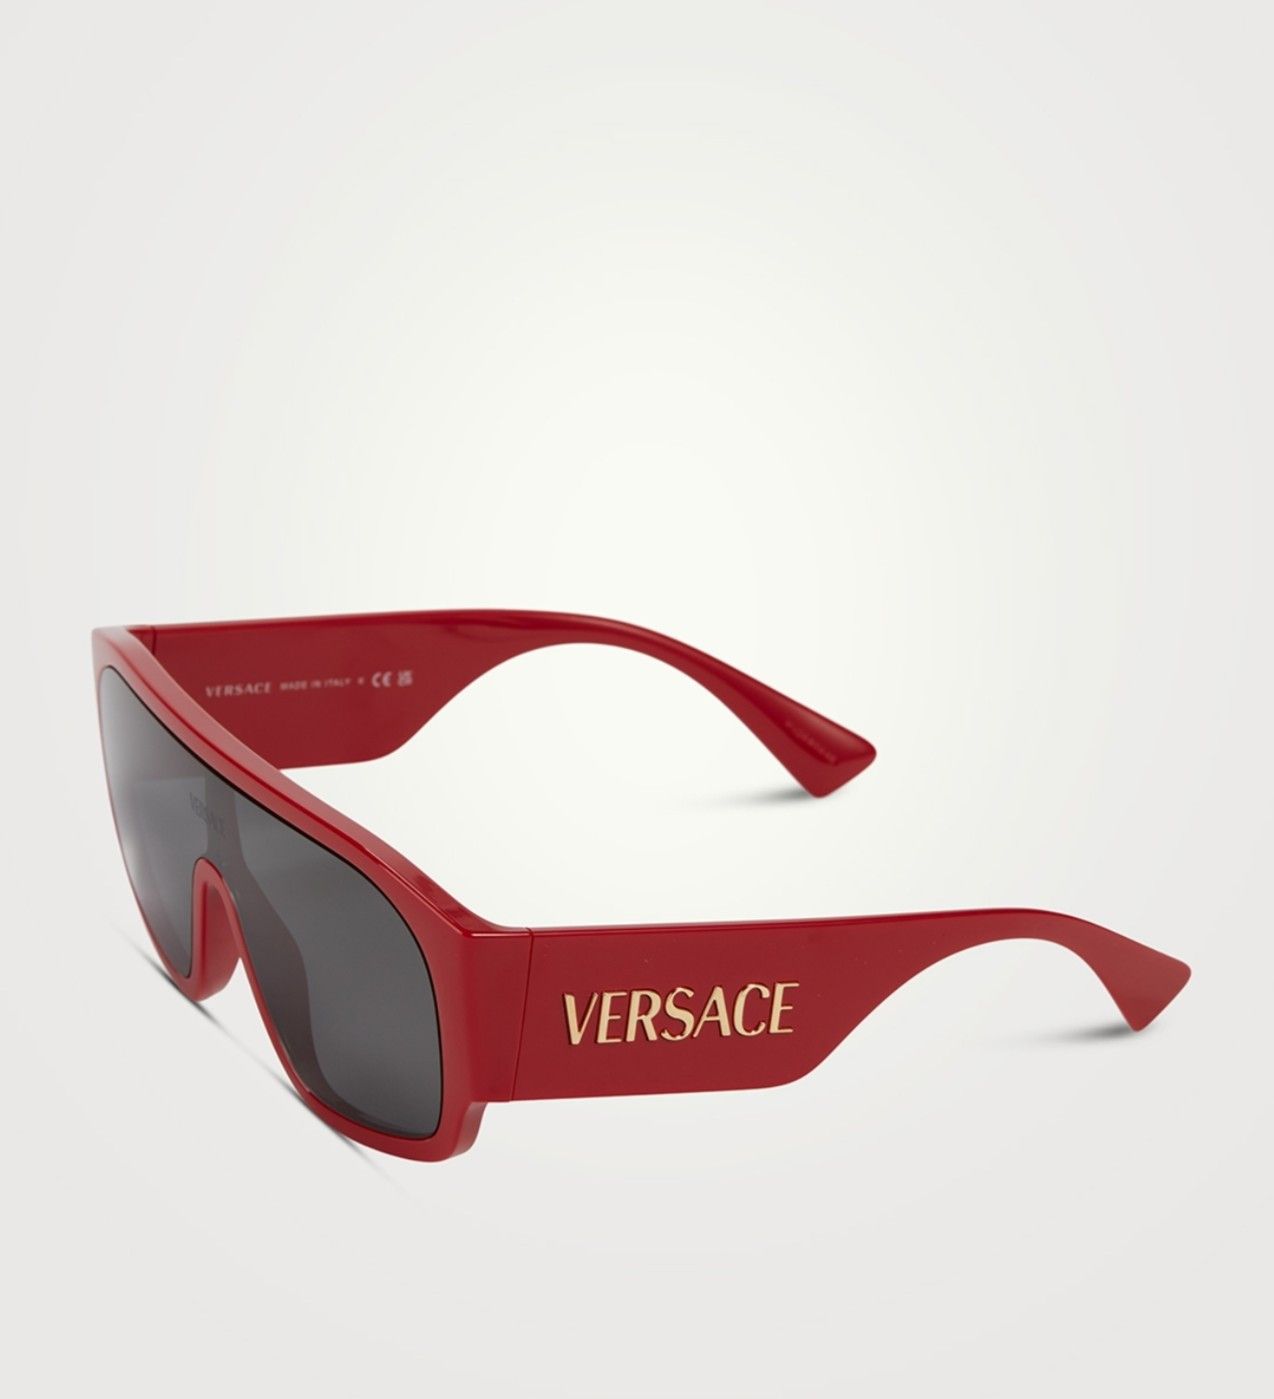 Versace Square Sunglasses Tortise (VE4434-511987)